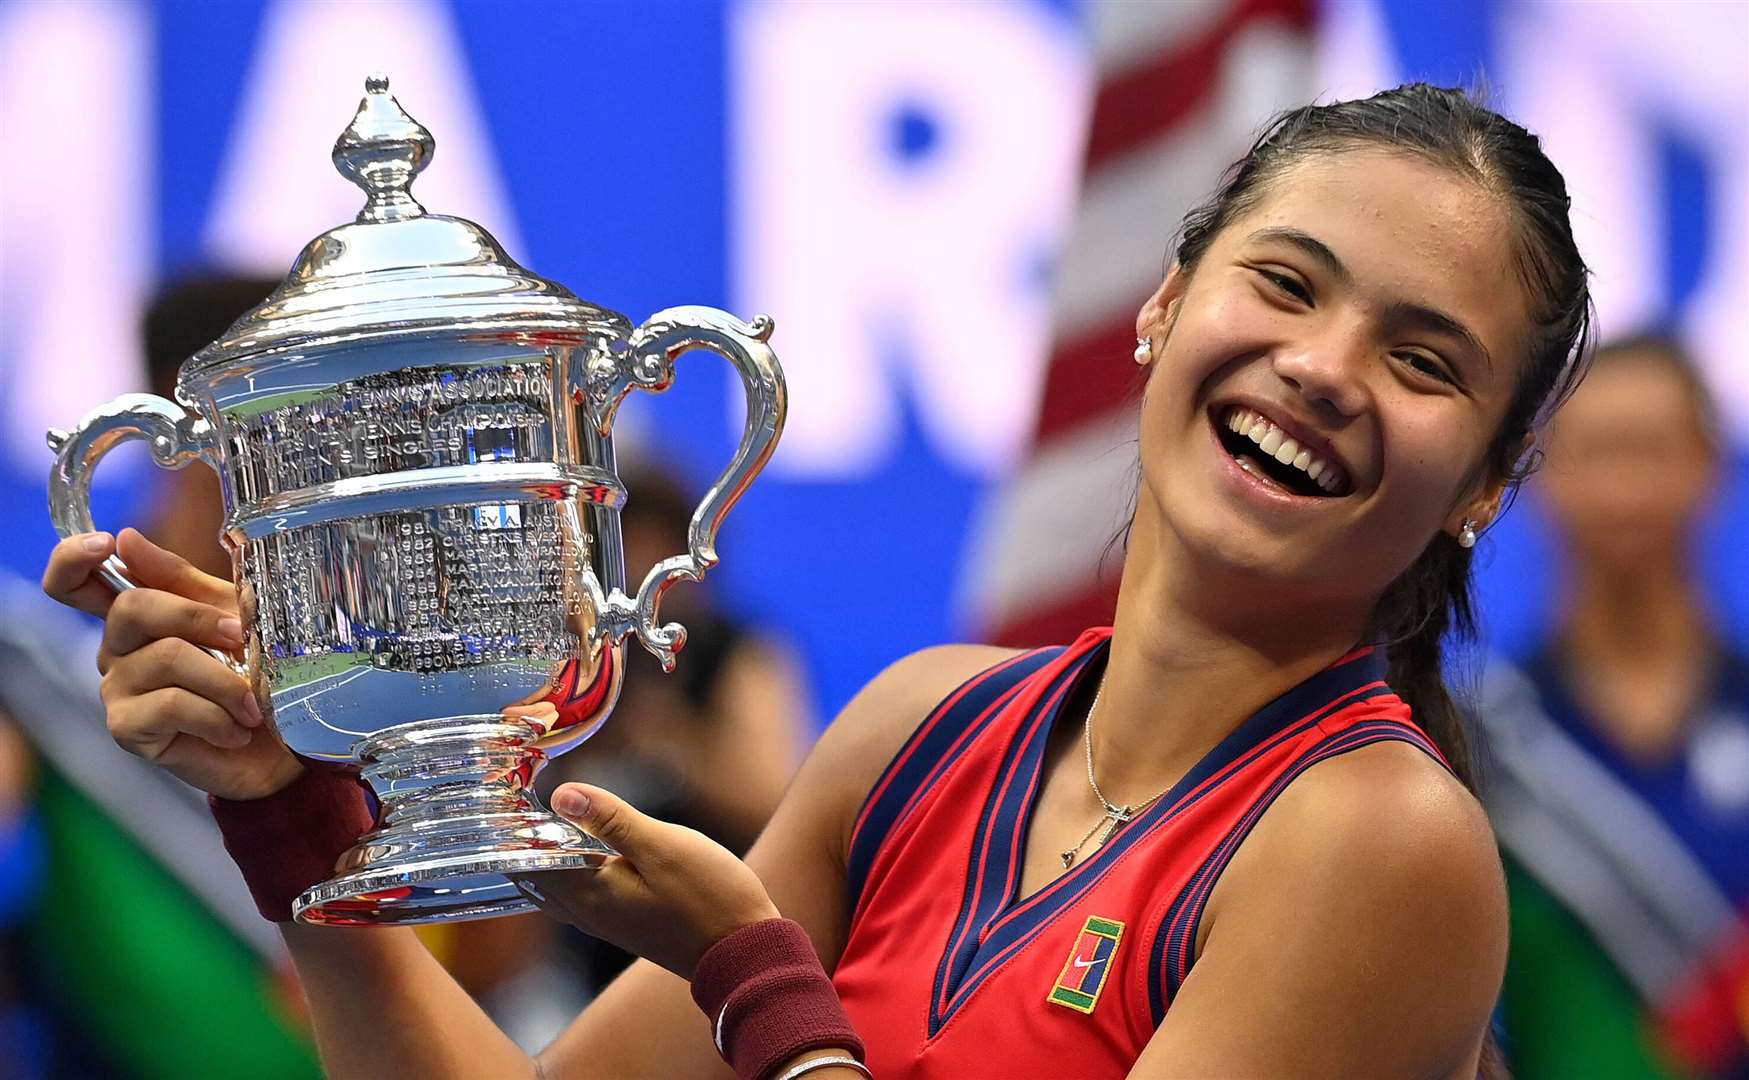 Teenager Emma Raducanu won the US Open final in September and is now up for 2021 Sports Personality of the Year. Picture: Paul Zimmer via www.imago-images.de/Imago/PA Images